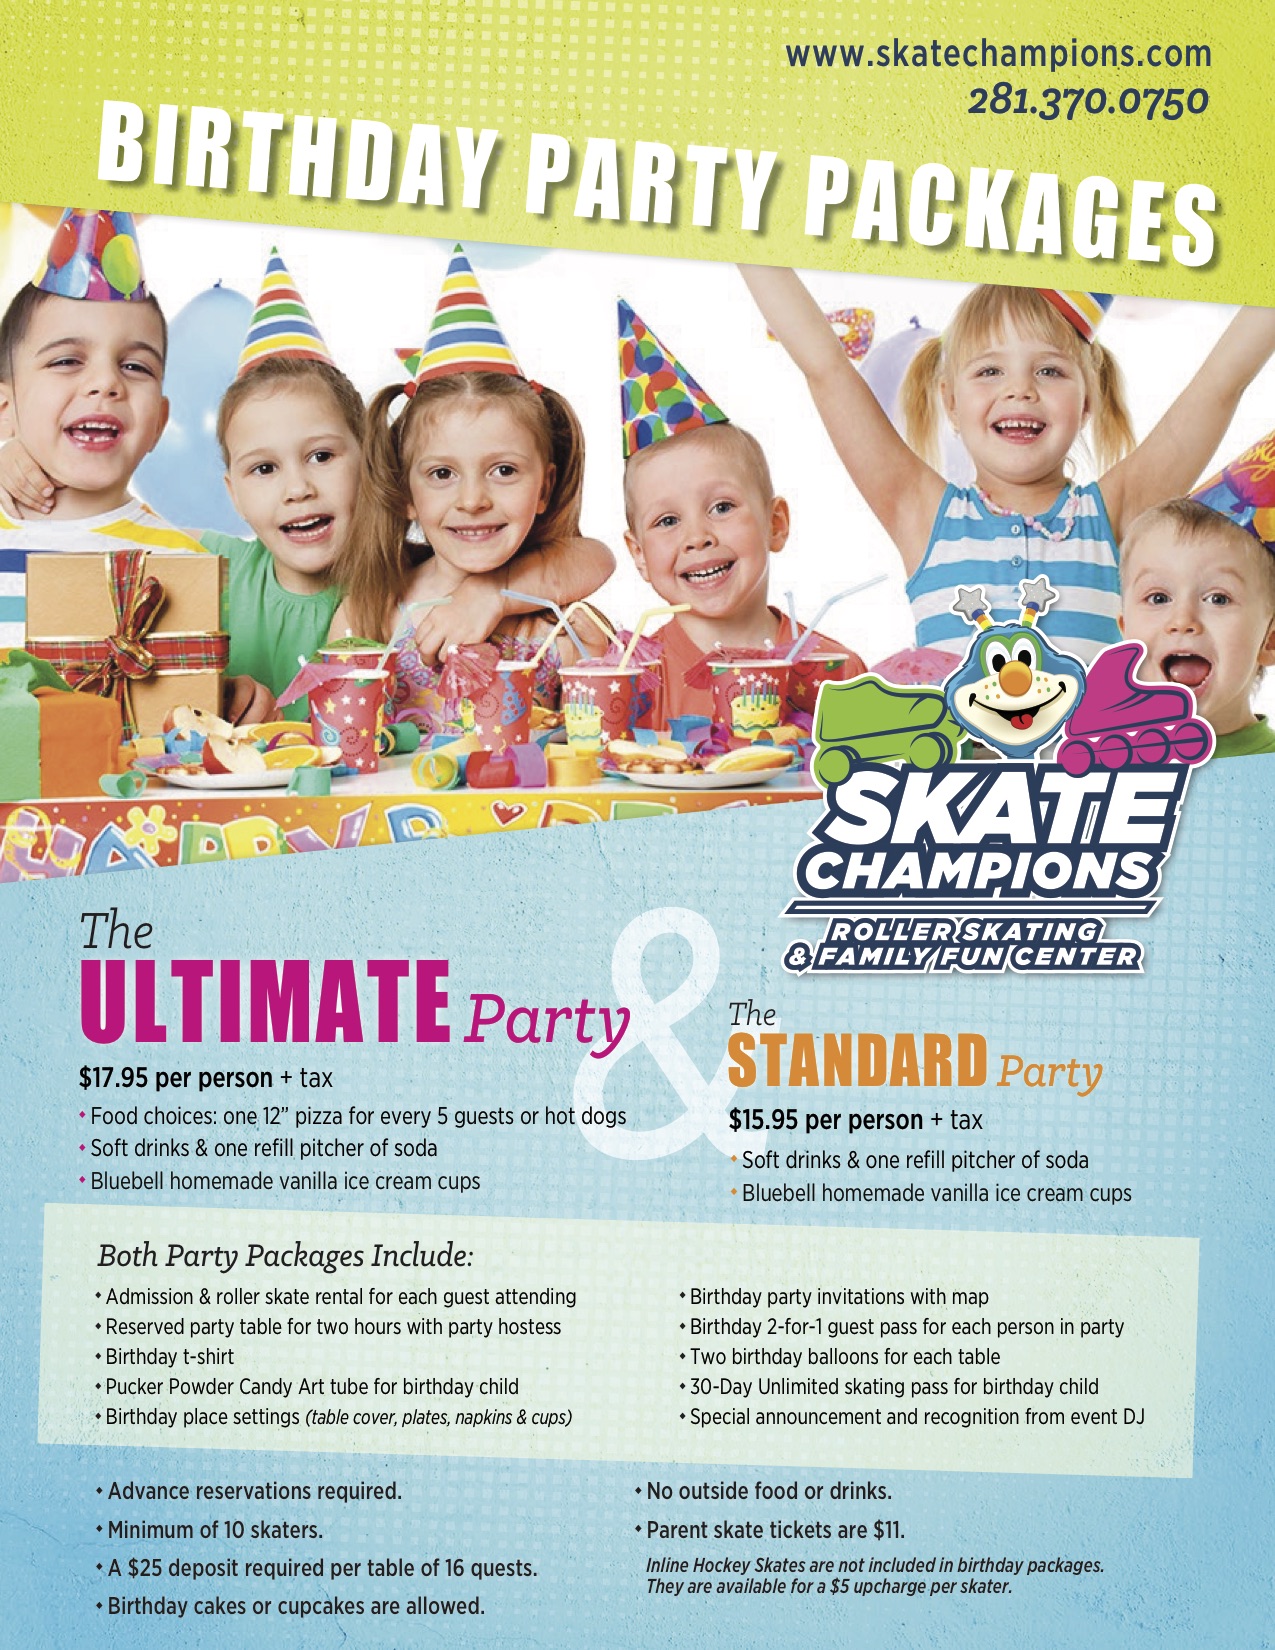 Book your birthday parties for Spring!